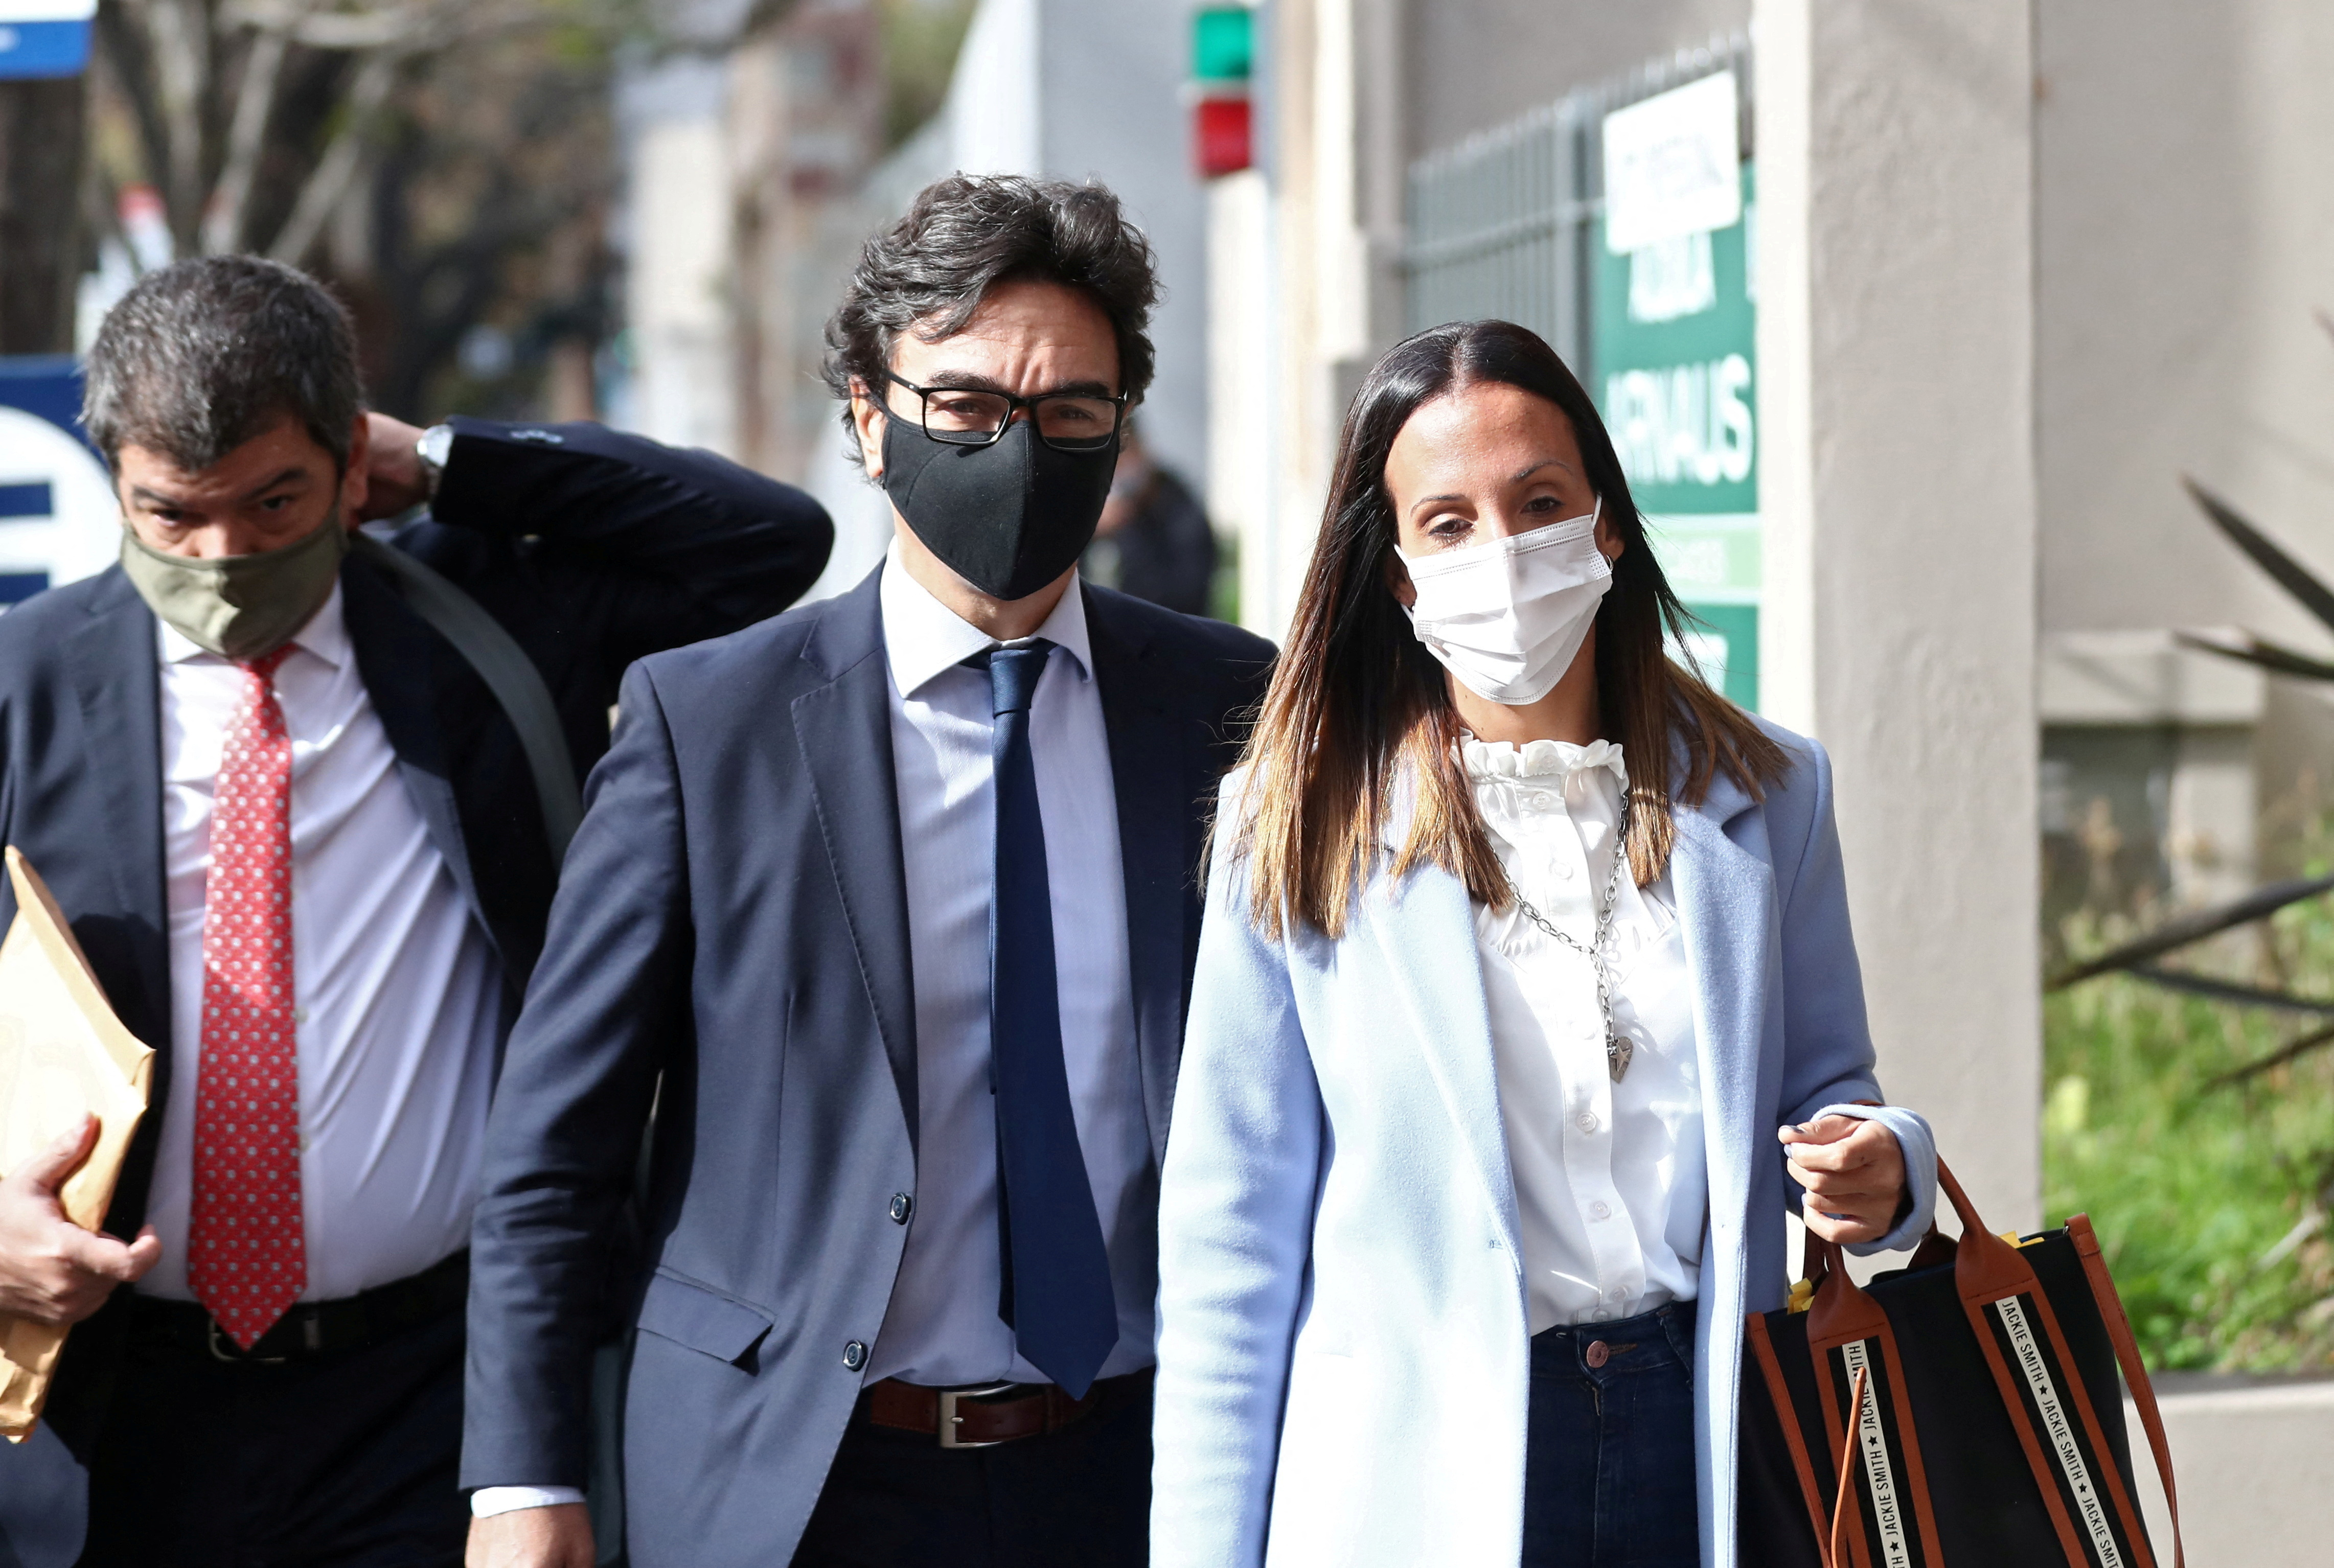 Agustina Cosachov, psychiatrist of late Argentine soccer legend Diego Armando Maradona arrives to a prosecutor's office in San Isidro, accompanied by her lawyer, Vadim Mischanchuk, in Buenos Aires